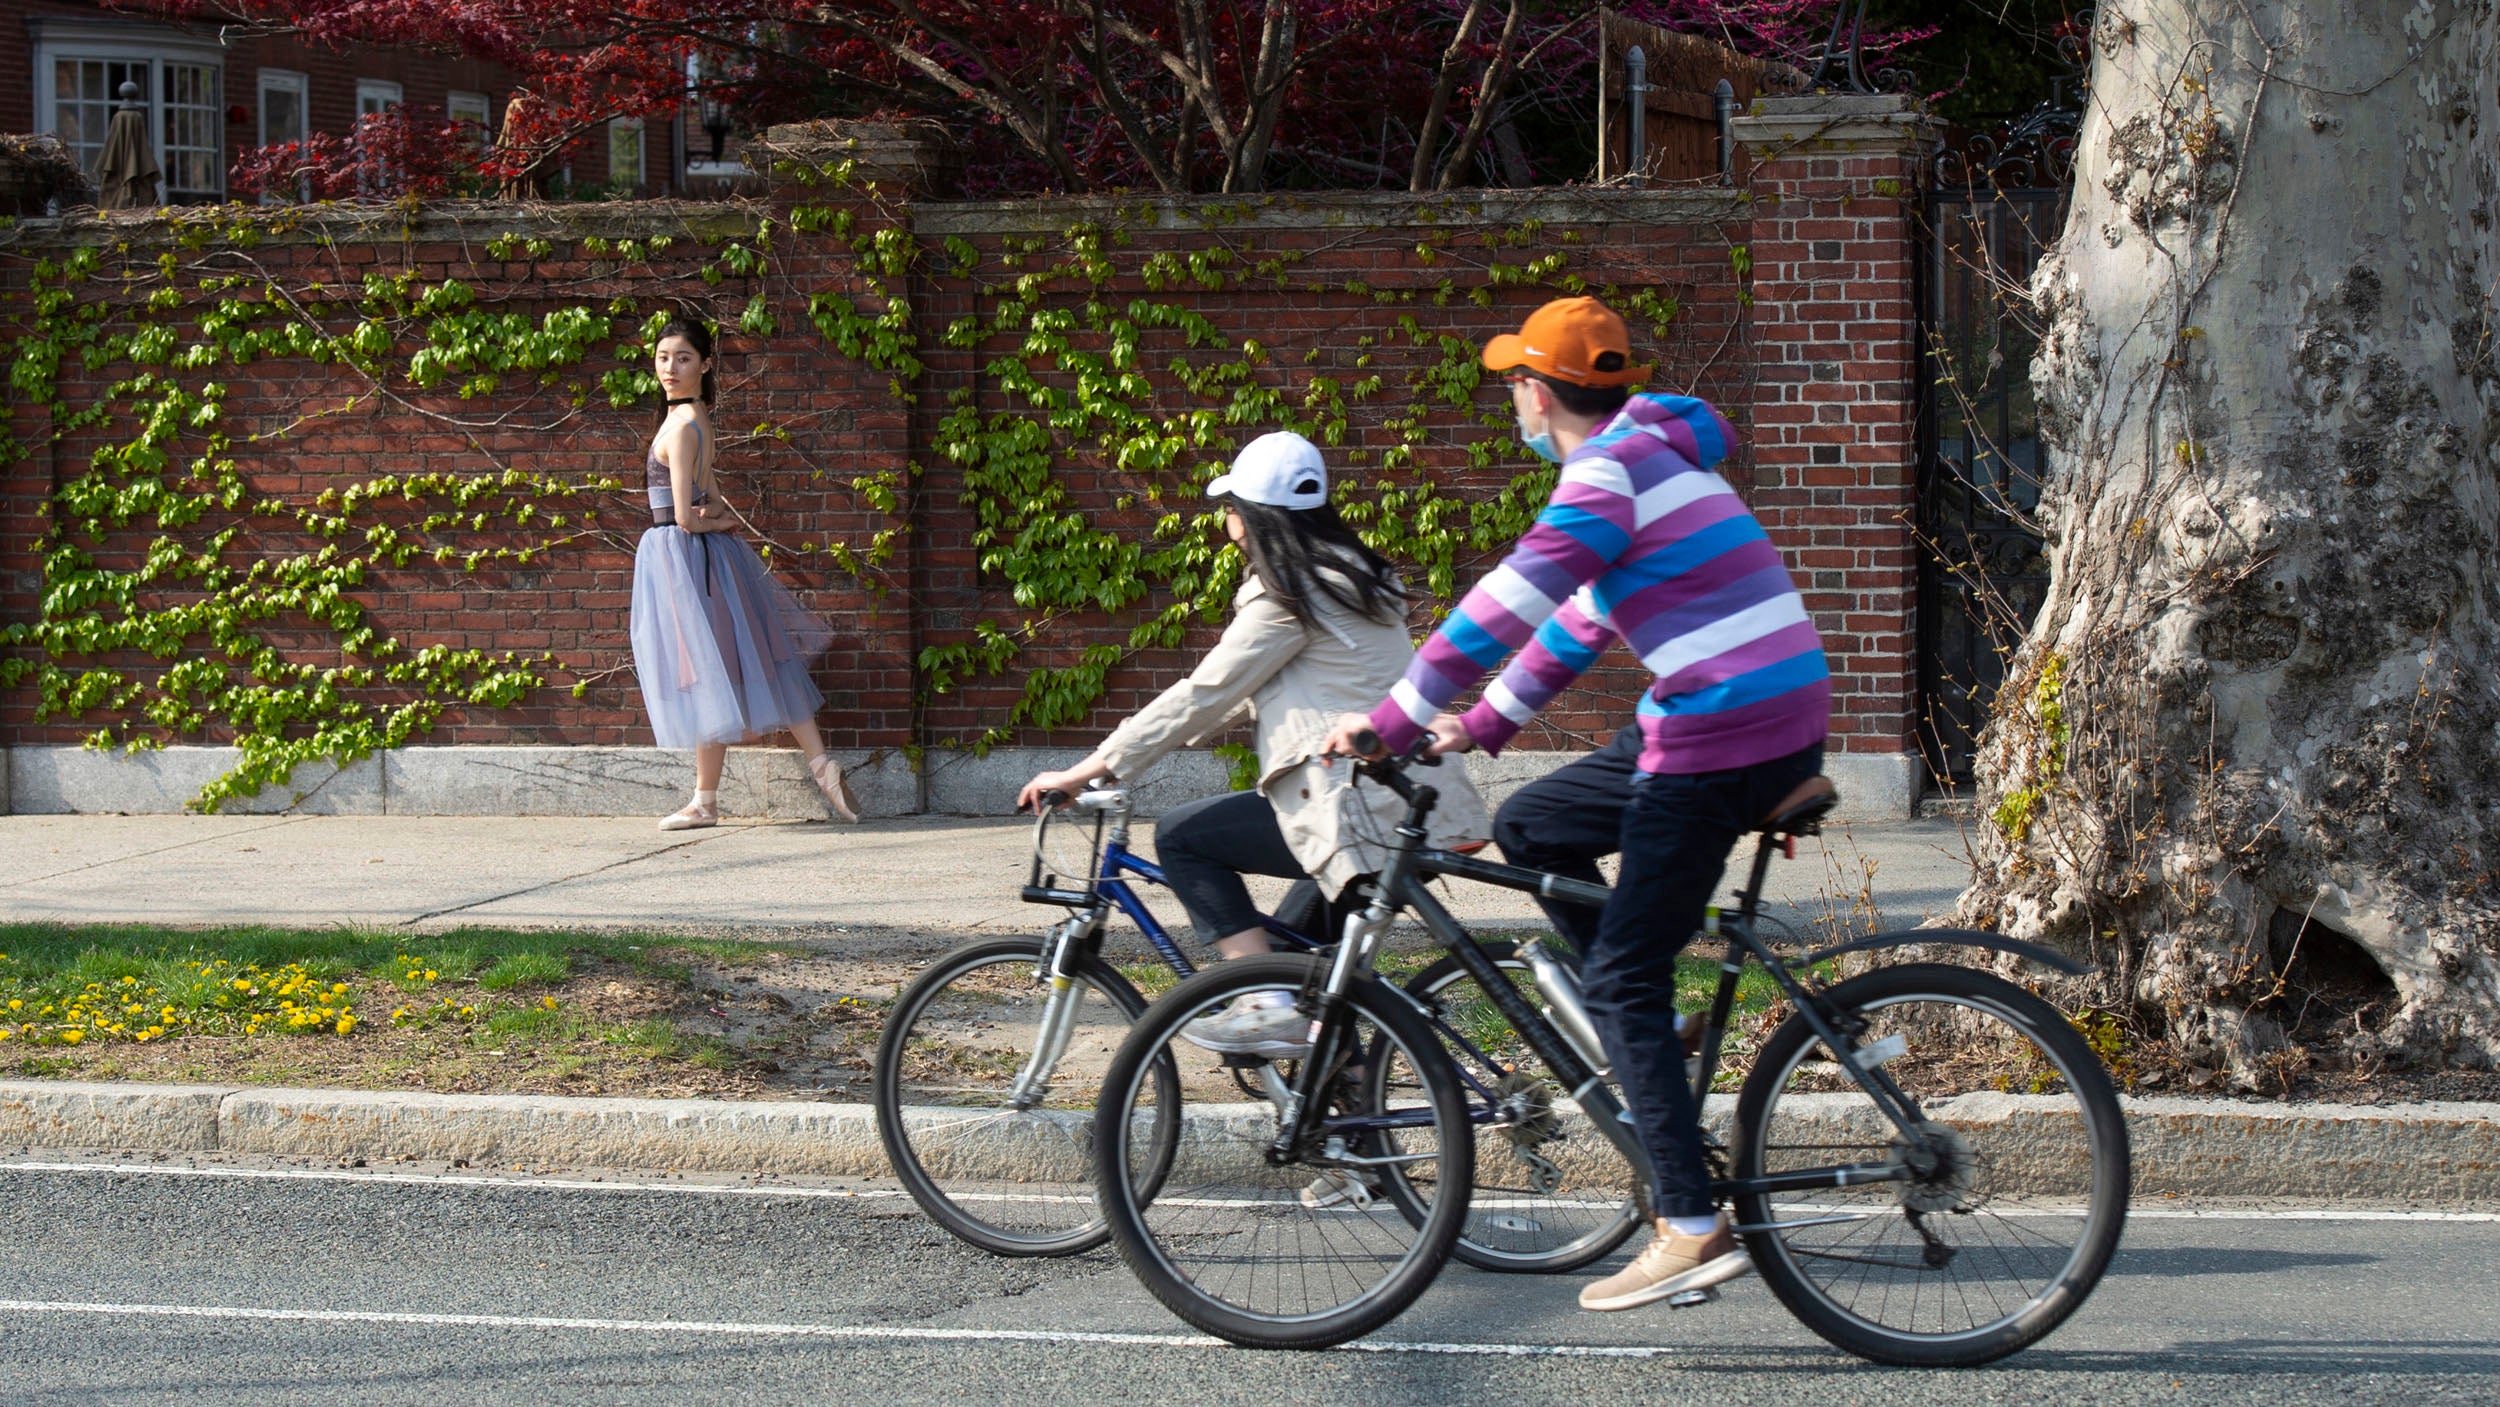 Two cyclists pass an M.I.T. student dancer posing for photos for a friend along Mem. Drive.